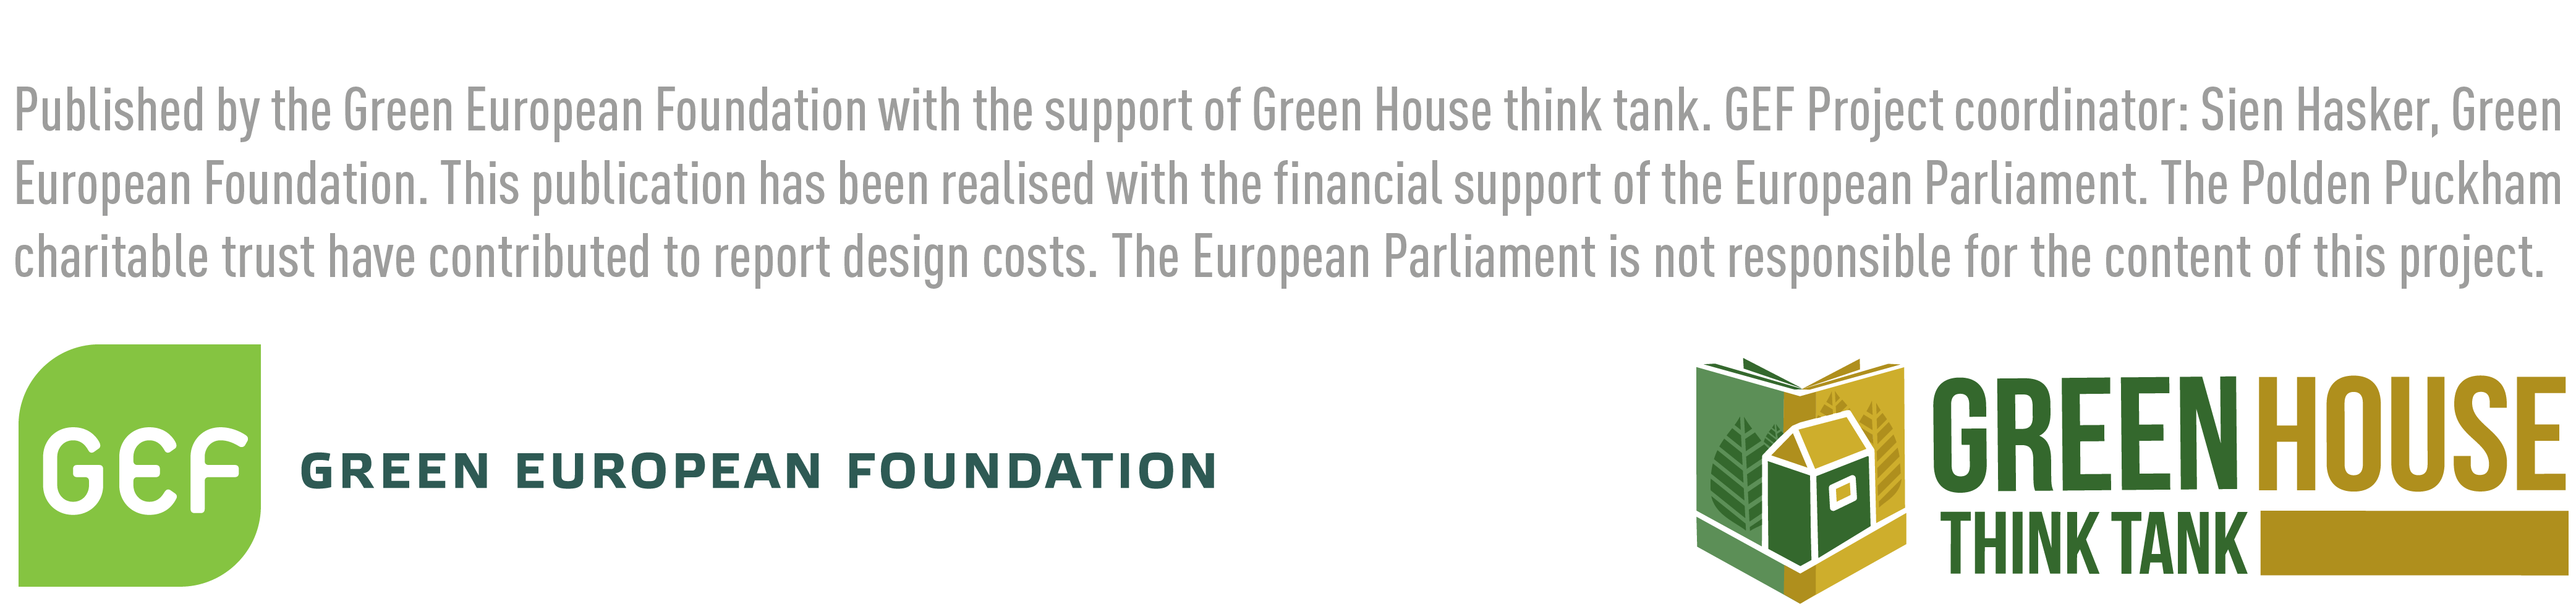 Image of the logos of the Green European think tank and green house think tank with text that reads Published by the Green European Foundation with the support of Green House think tank. GEF project coordinator: Sian Hasker, Green European Foundation. This publication has been realised with financial support of the European parliament. The Polden Puckham charitable trust have contributed to the report design costs. The European Parliament is not responsible for the content of this project. 